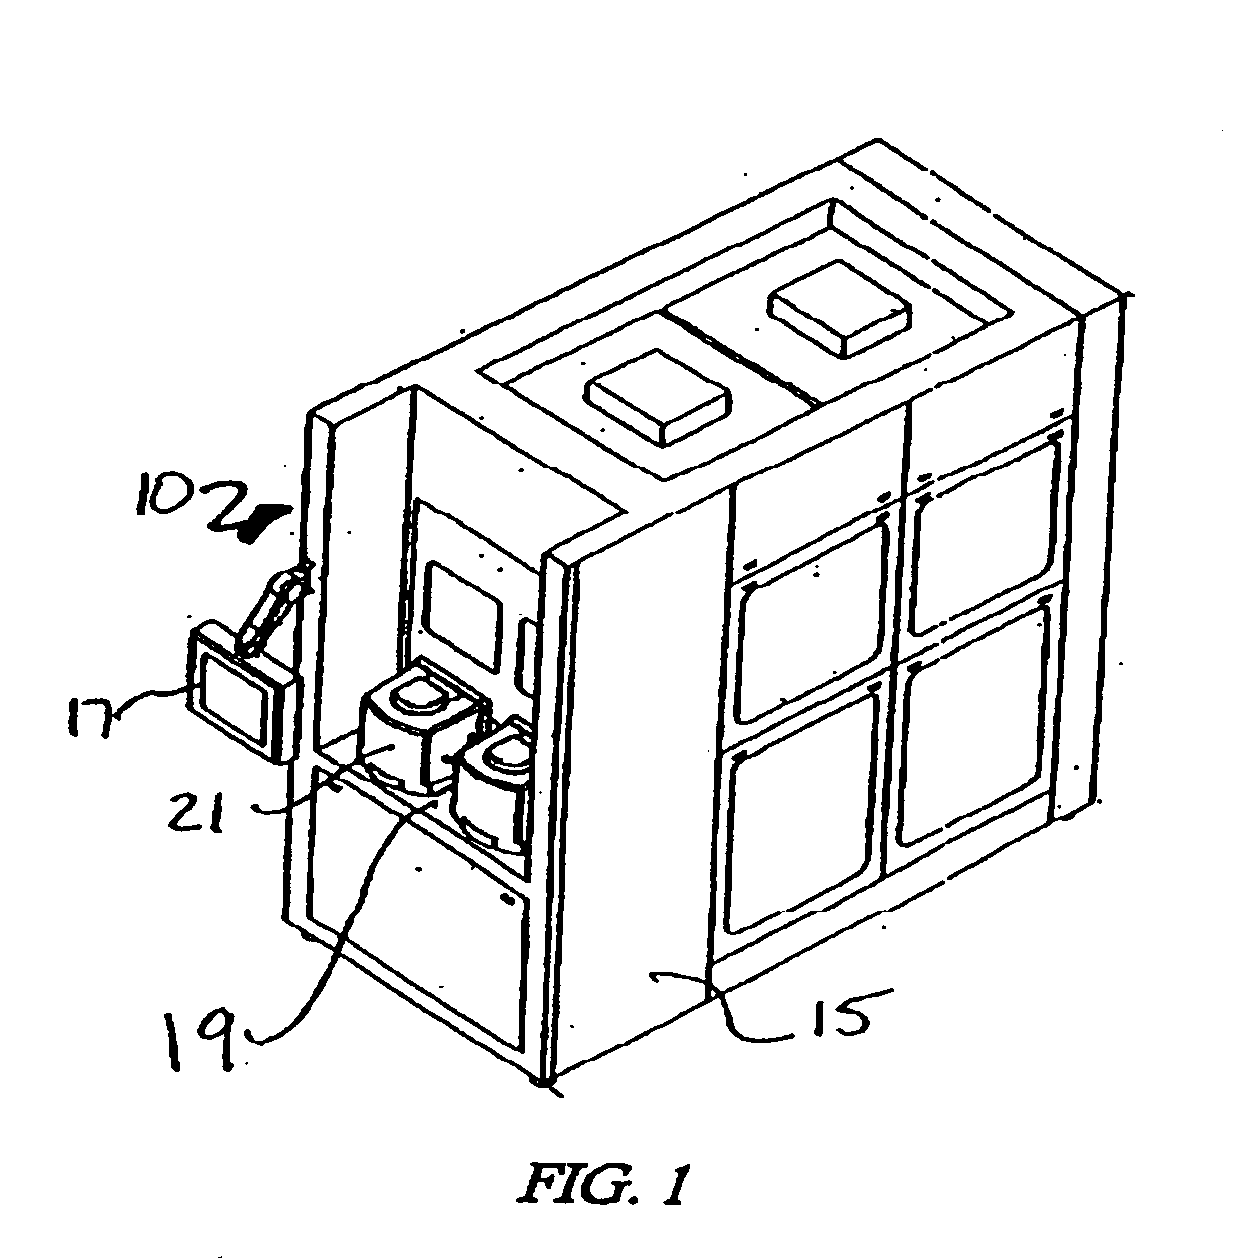 System for processing a workpiece